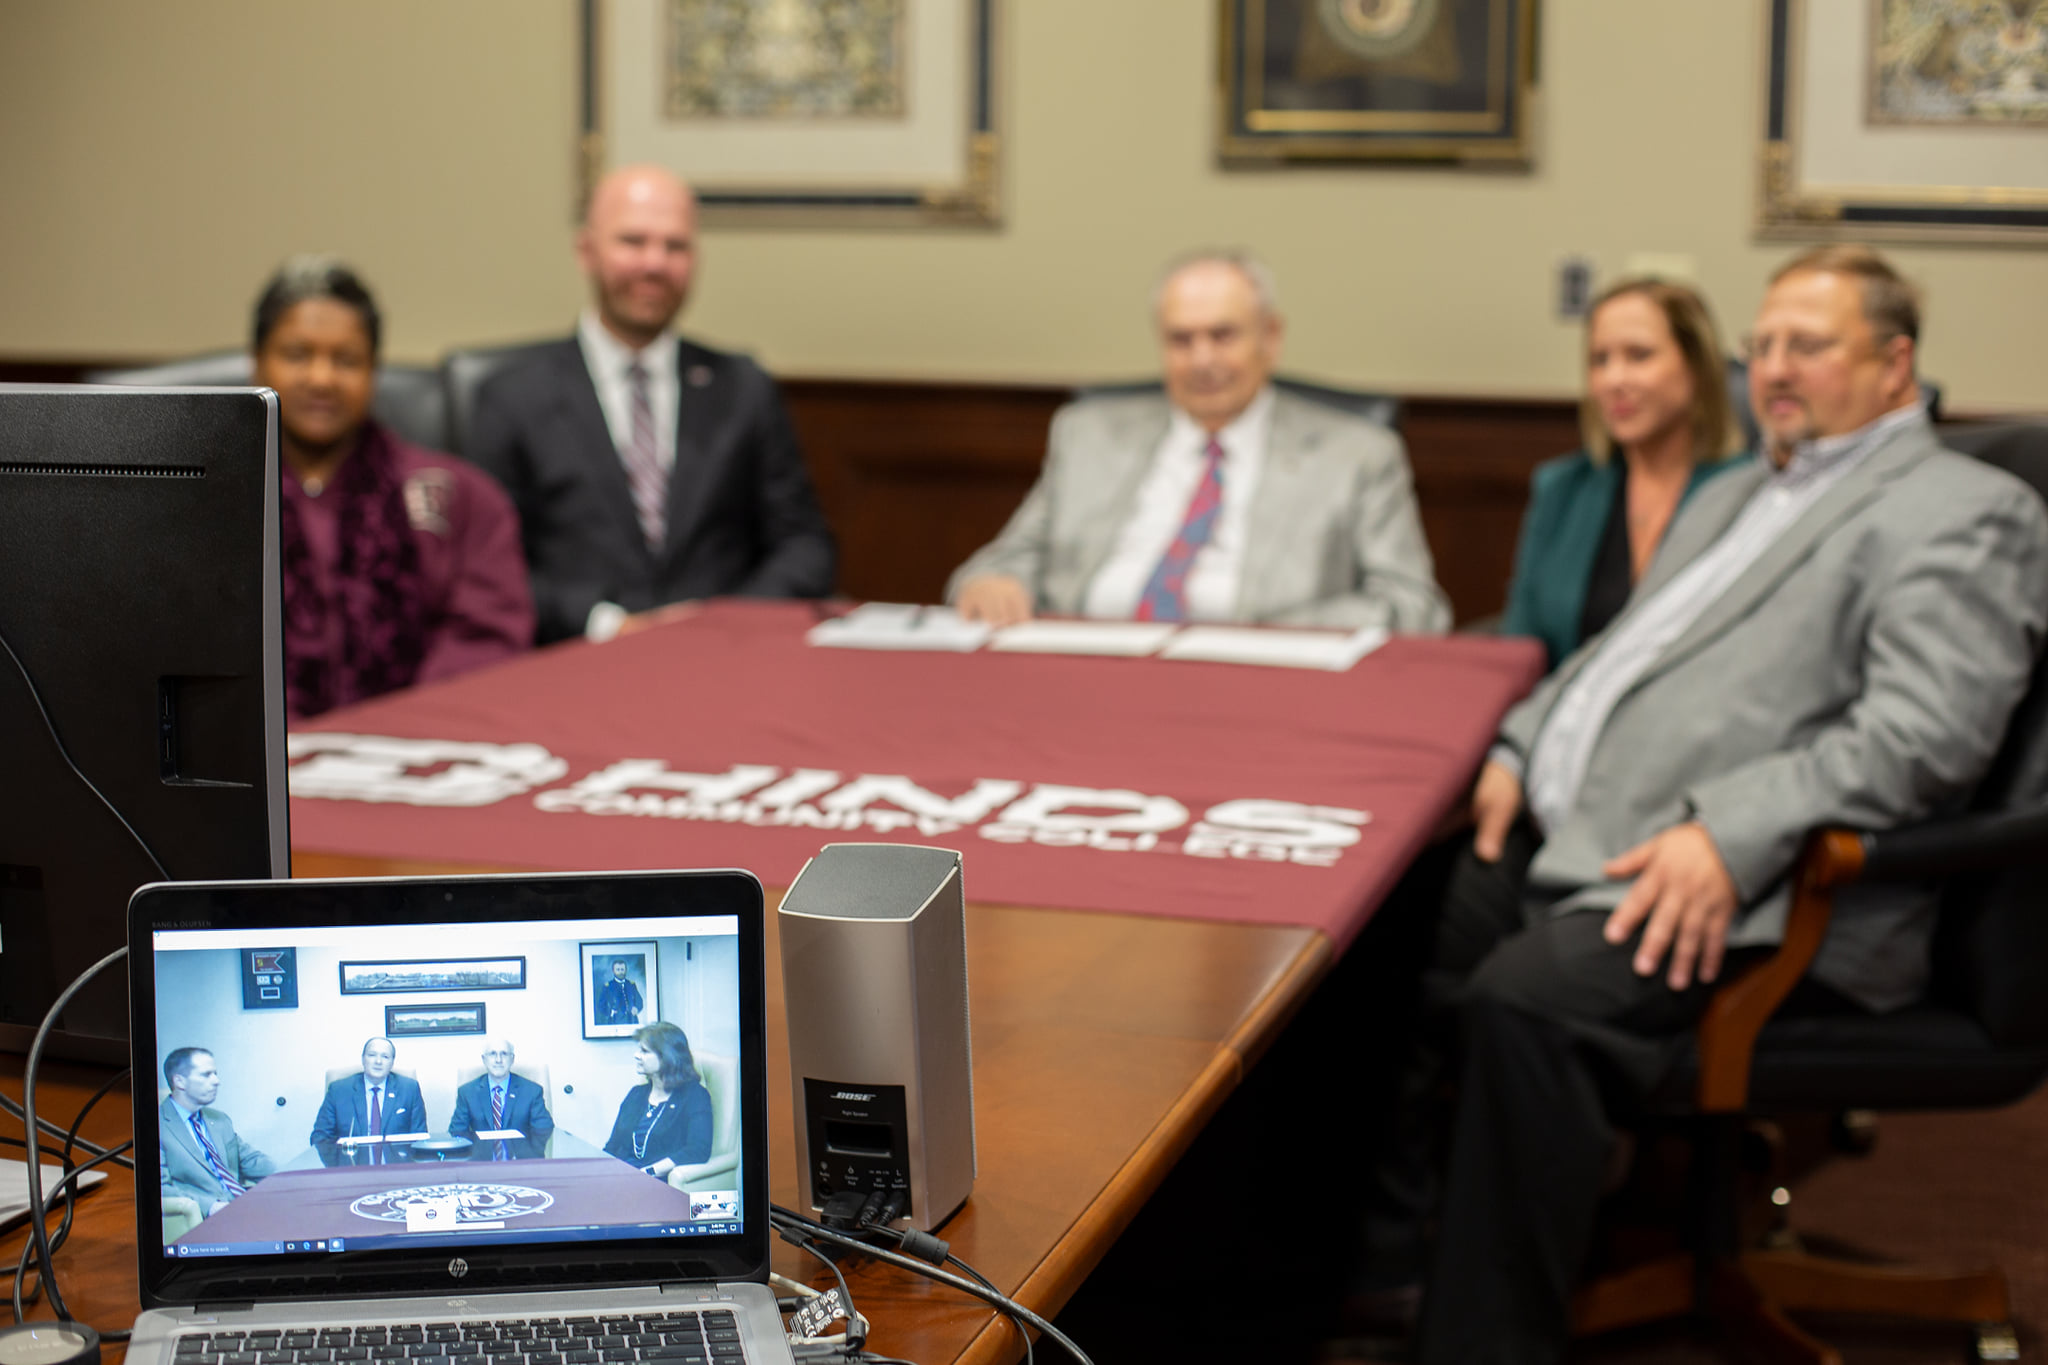 While on a video conference with Hinds Community College leaders Thursday [Nov. 14], Mississippi State leaders celebrated the signing of a new agreement that outlines pathways for HCC students to complete MSU’s Bachelor of Applied Science program.